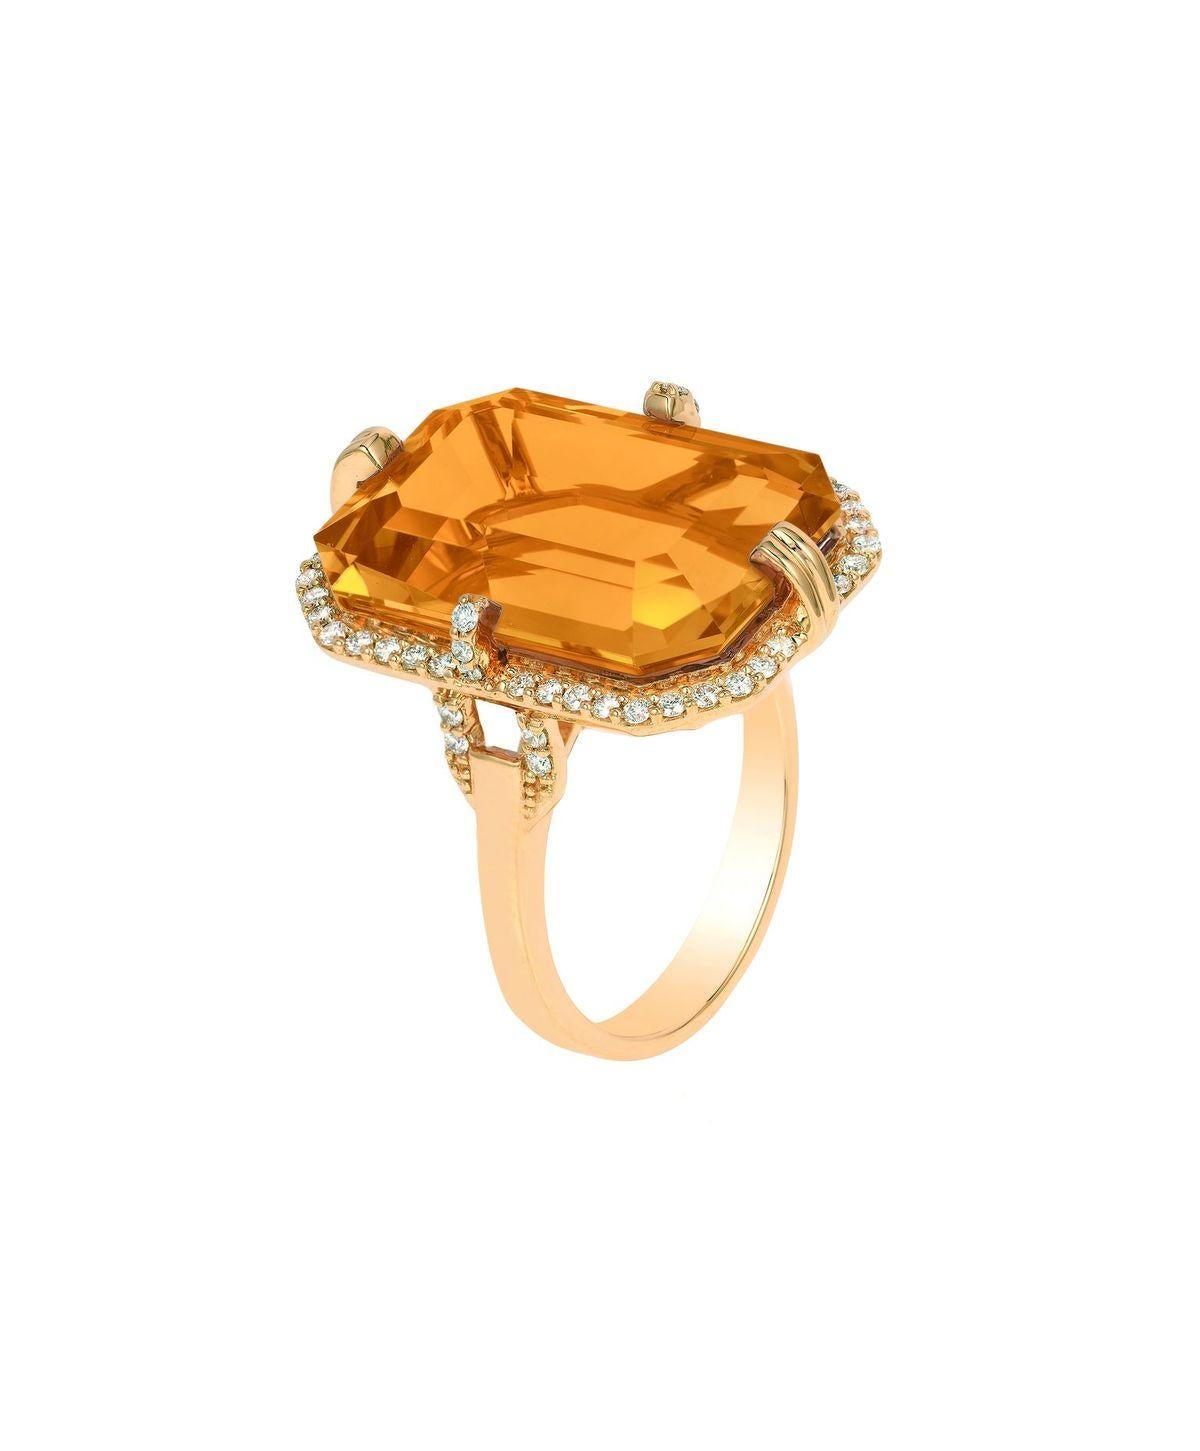 Citrine Emerald Cut Ring with Diamonds in 18K Yellow Gold, From 'Gossip' Collection. Like any good piece of gossip, this collection carries a hint of shock value. They will have everyone in suspense about what Goshwara will do next.

* Gemstone